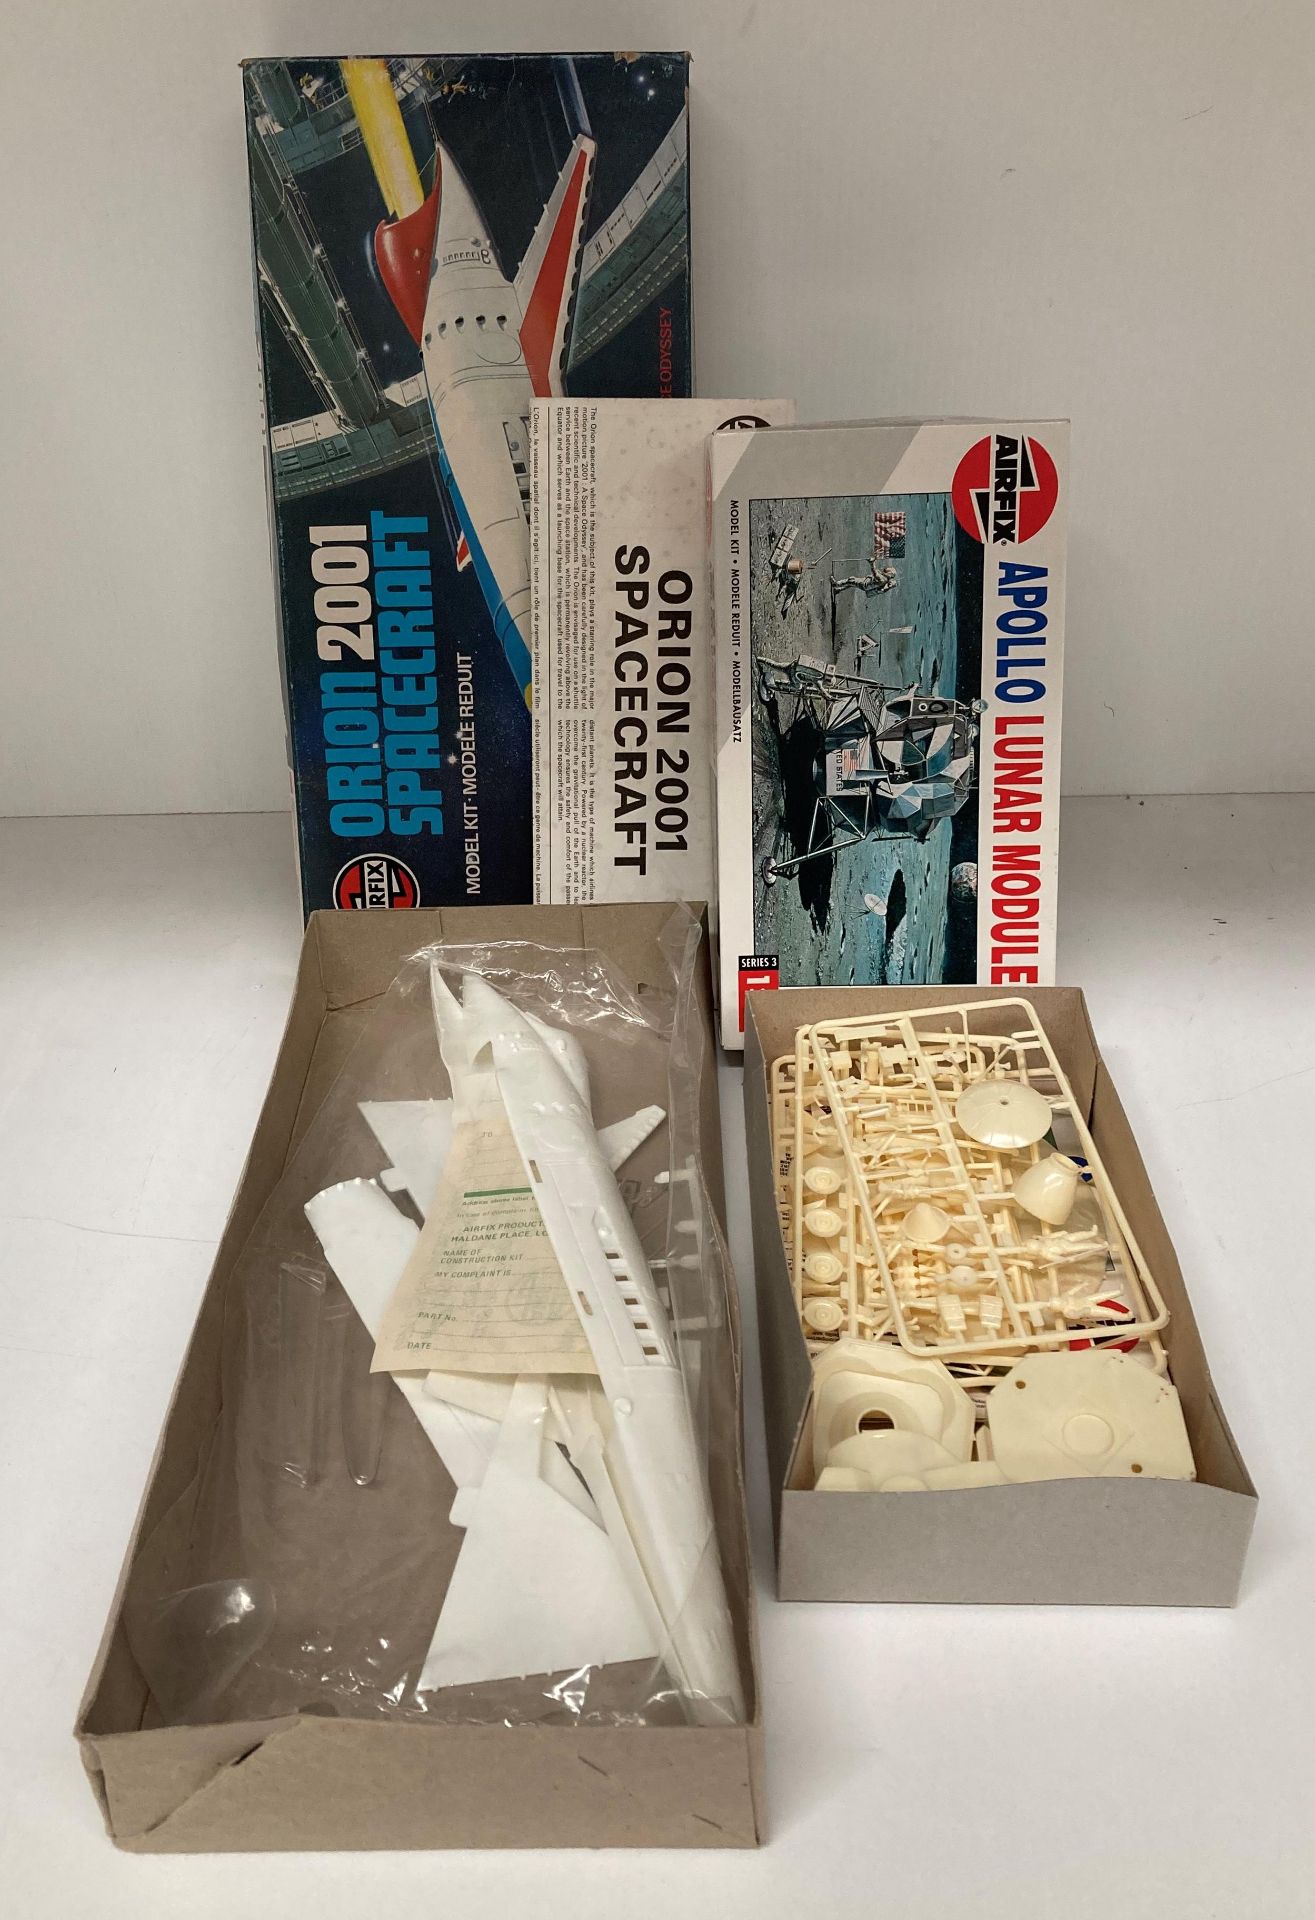 Two assorted Airfix model kits "Apollo Lunar Module" 1:72 scale series 3 No: 03013 model kit and - Image 2 of 2